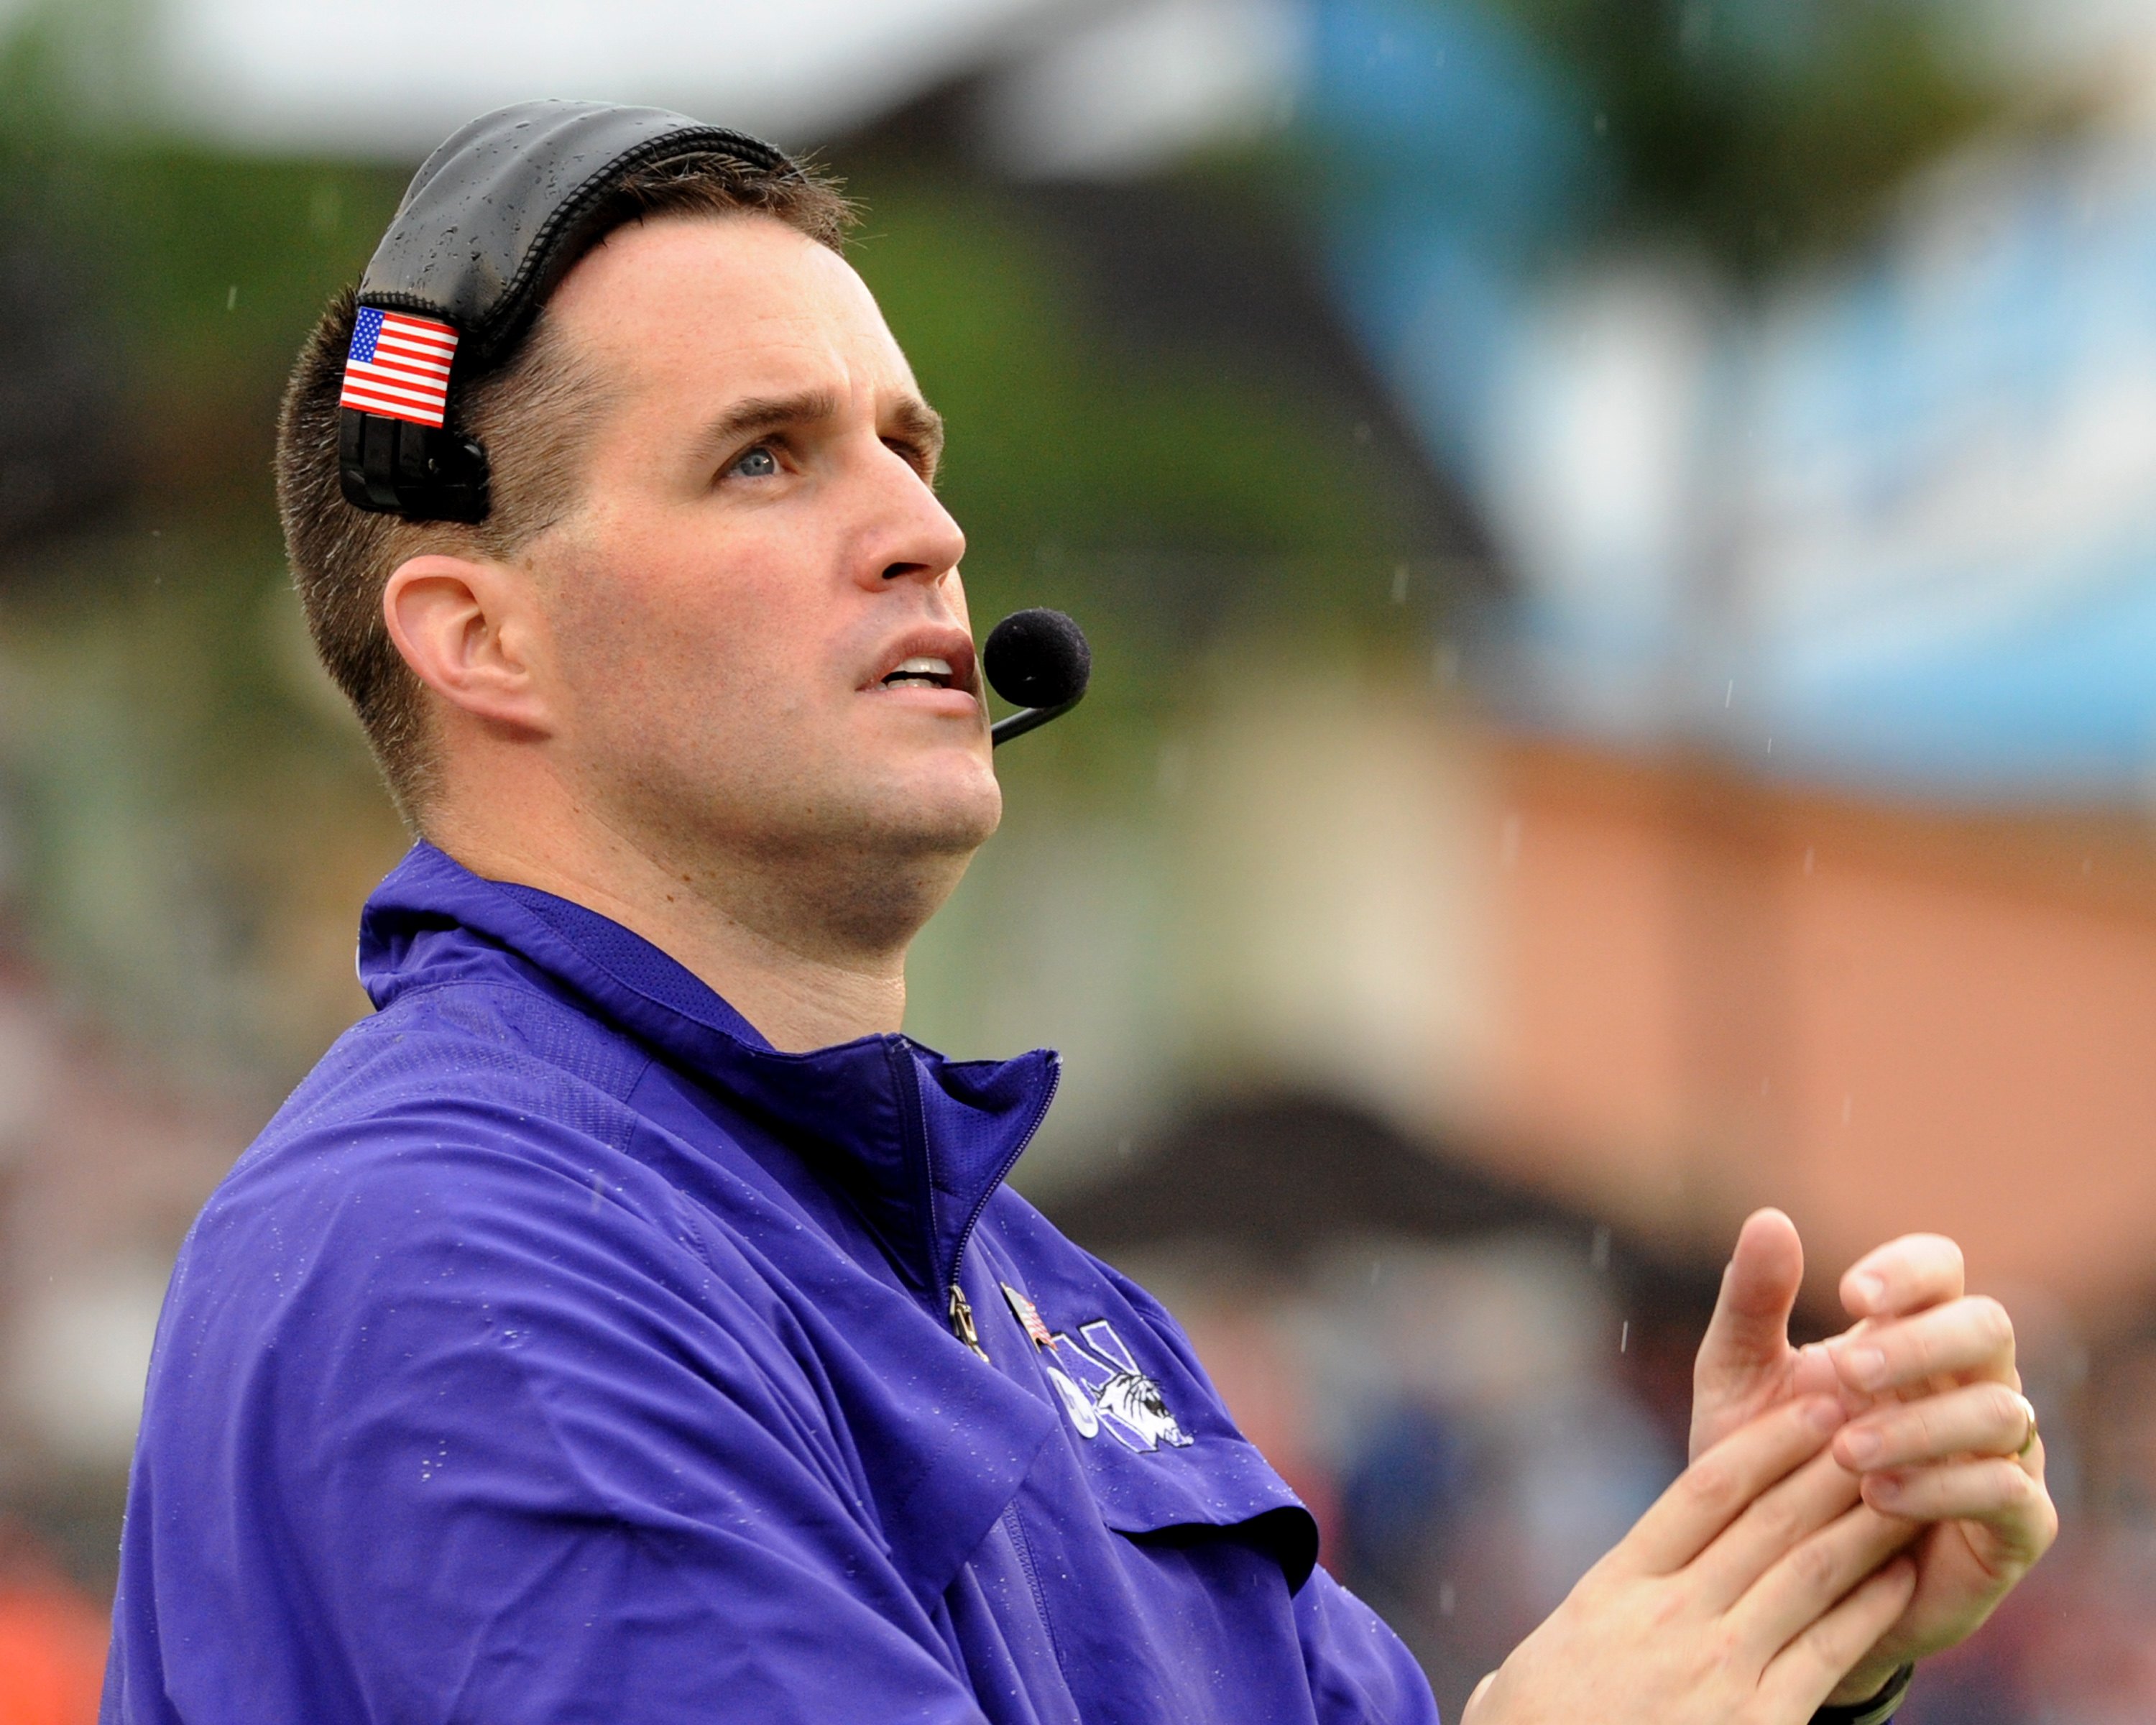 TAMPA, FL - JANUARY 1: Coach Pat Fitzgerald of the Northwestern Wildcats directs play against the Auburn Tigers in the Outback Bowl January 1, 2010 at Raymond James Stadium in Tampa, Florida.  (Photo by Al Messerschmidt/Getty Images)